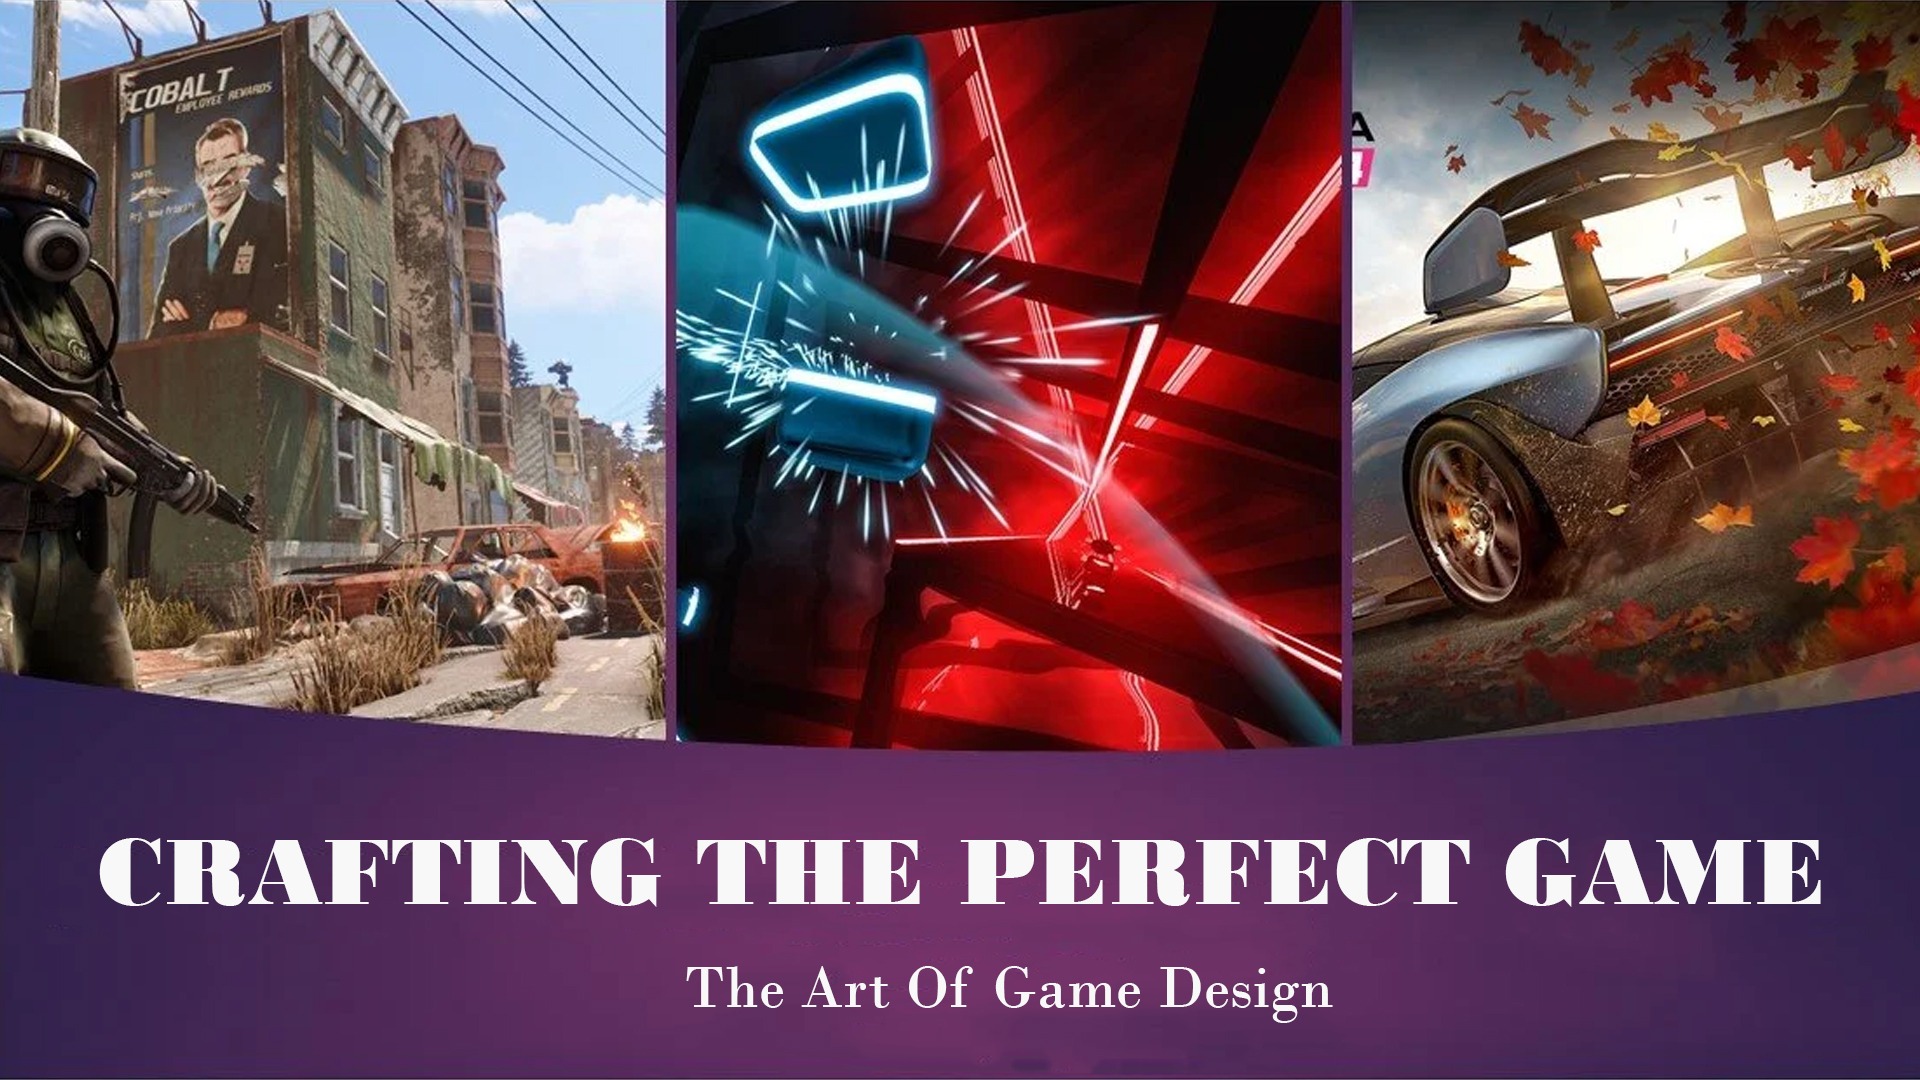 The Art of Game Design: Crafting the Perfect Game